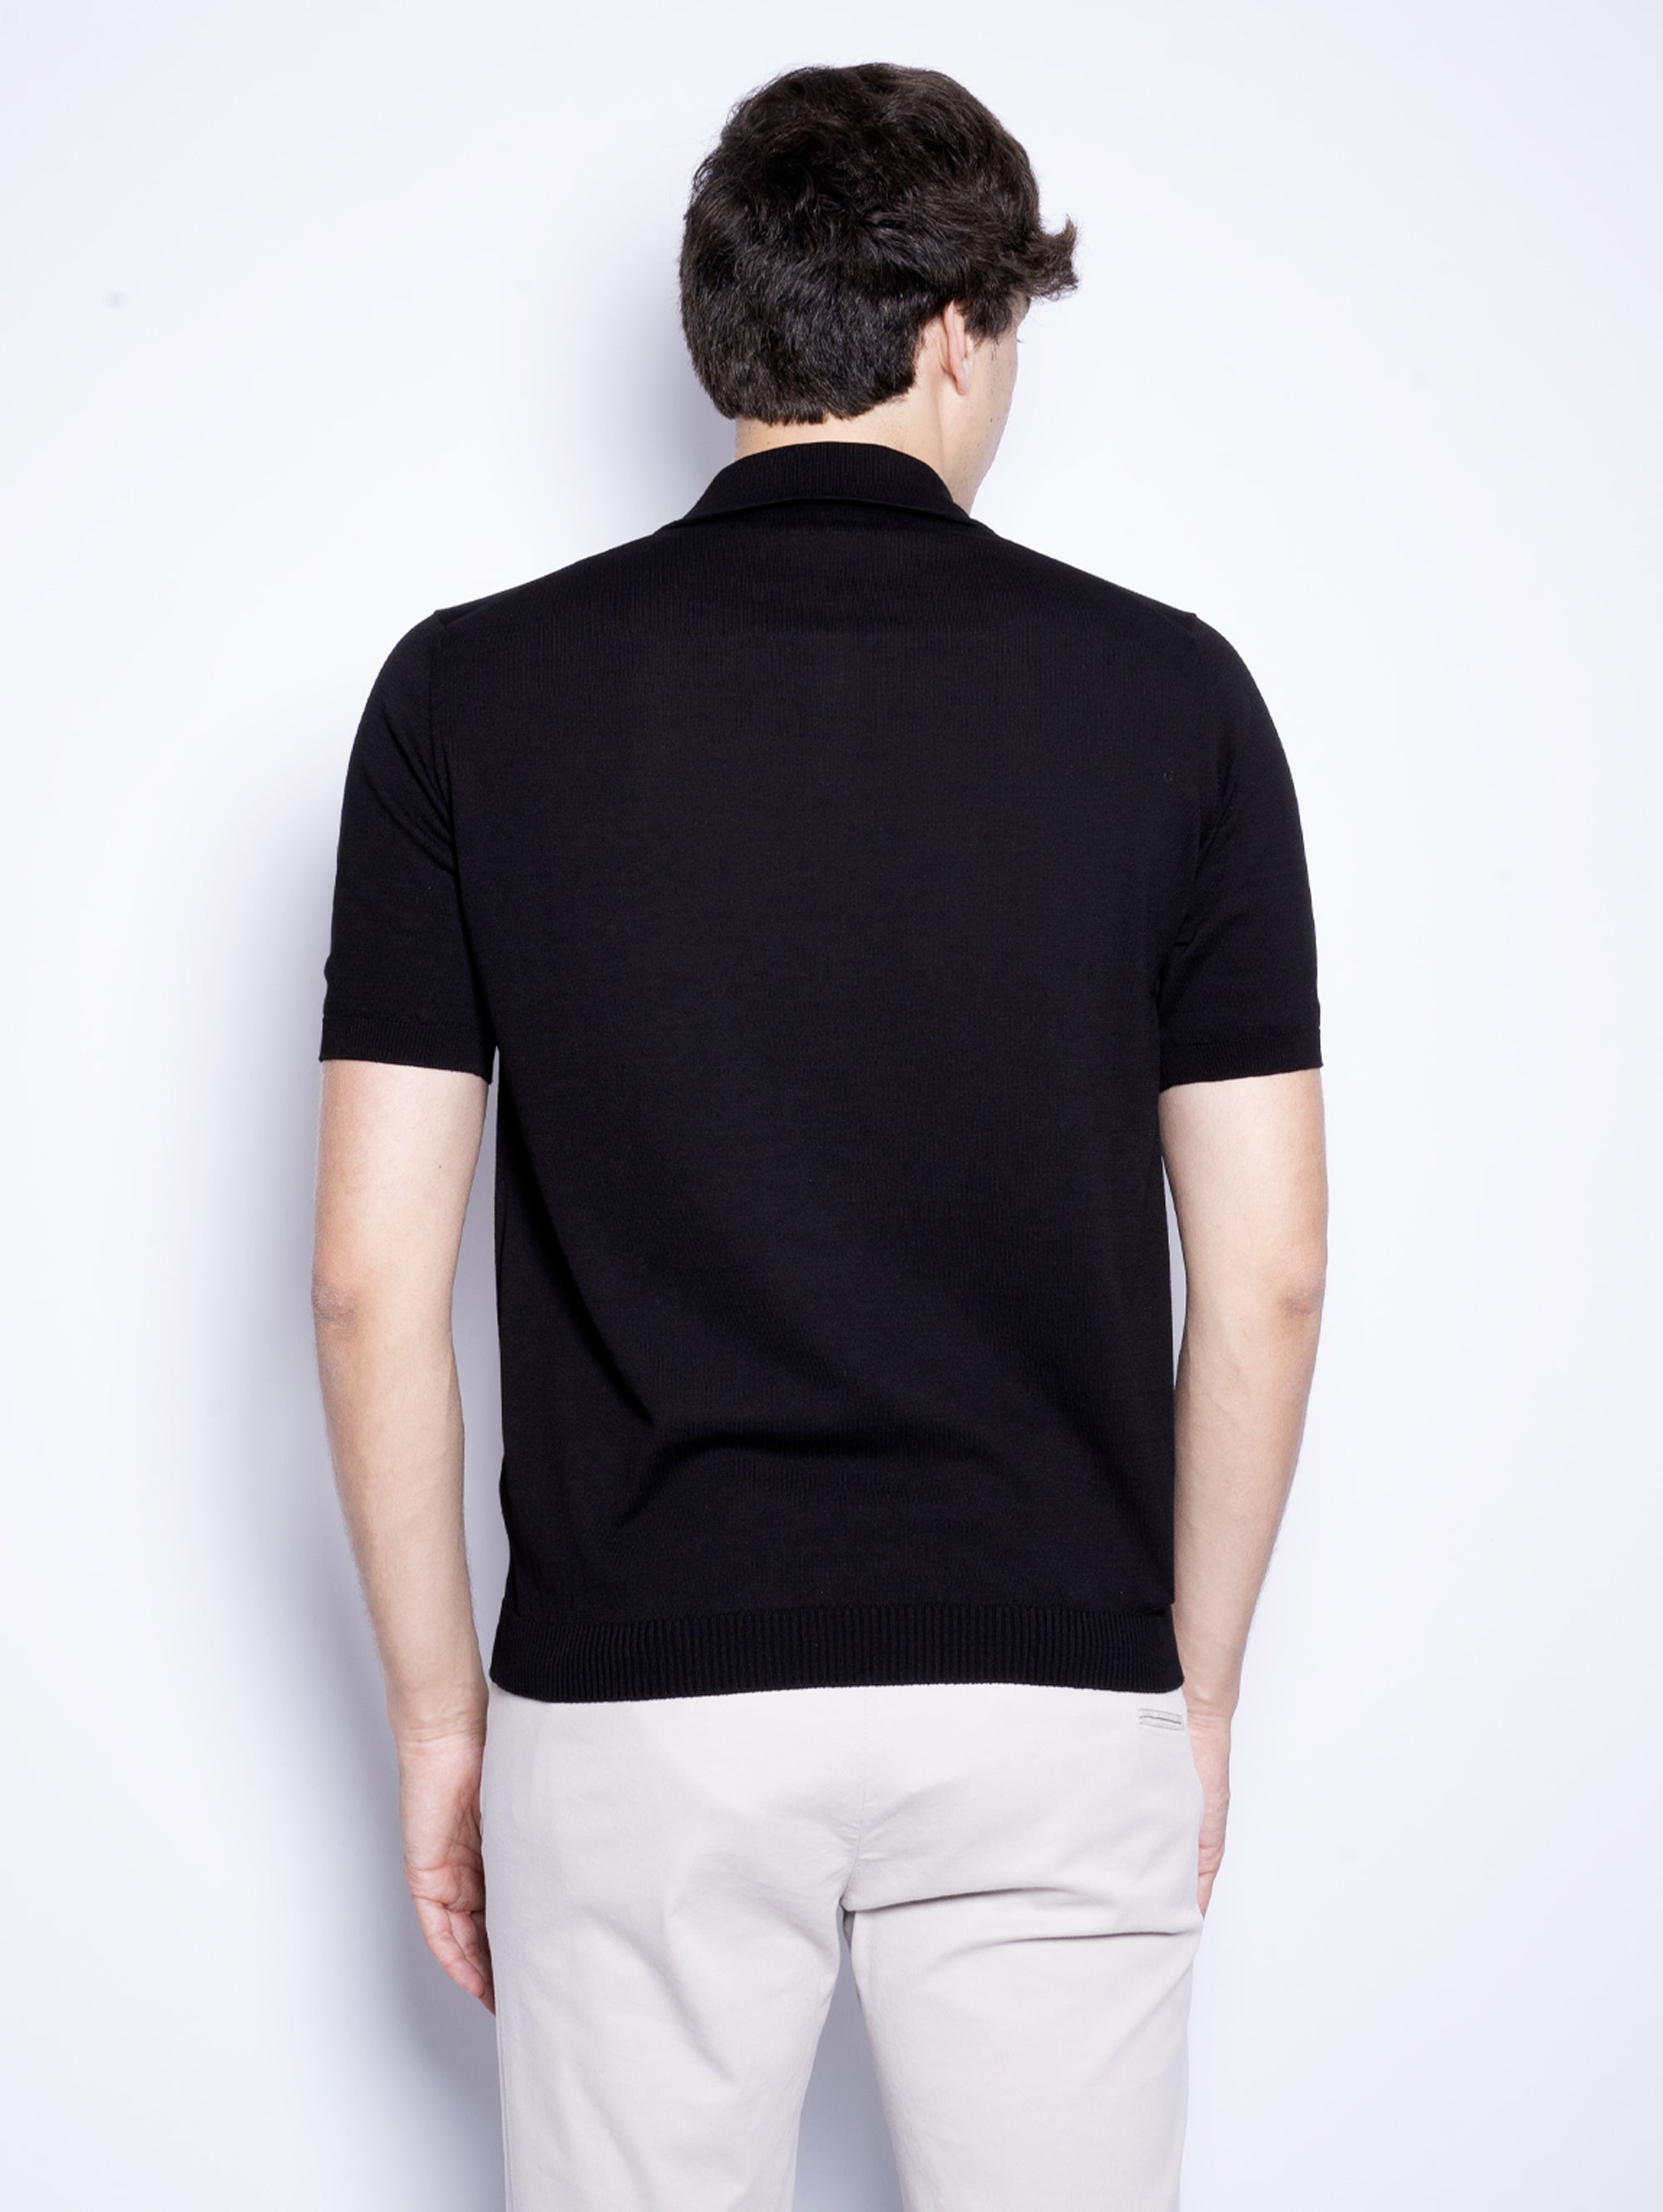 Black Polo Shirt with Three Buttons